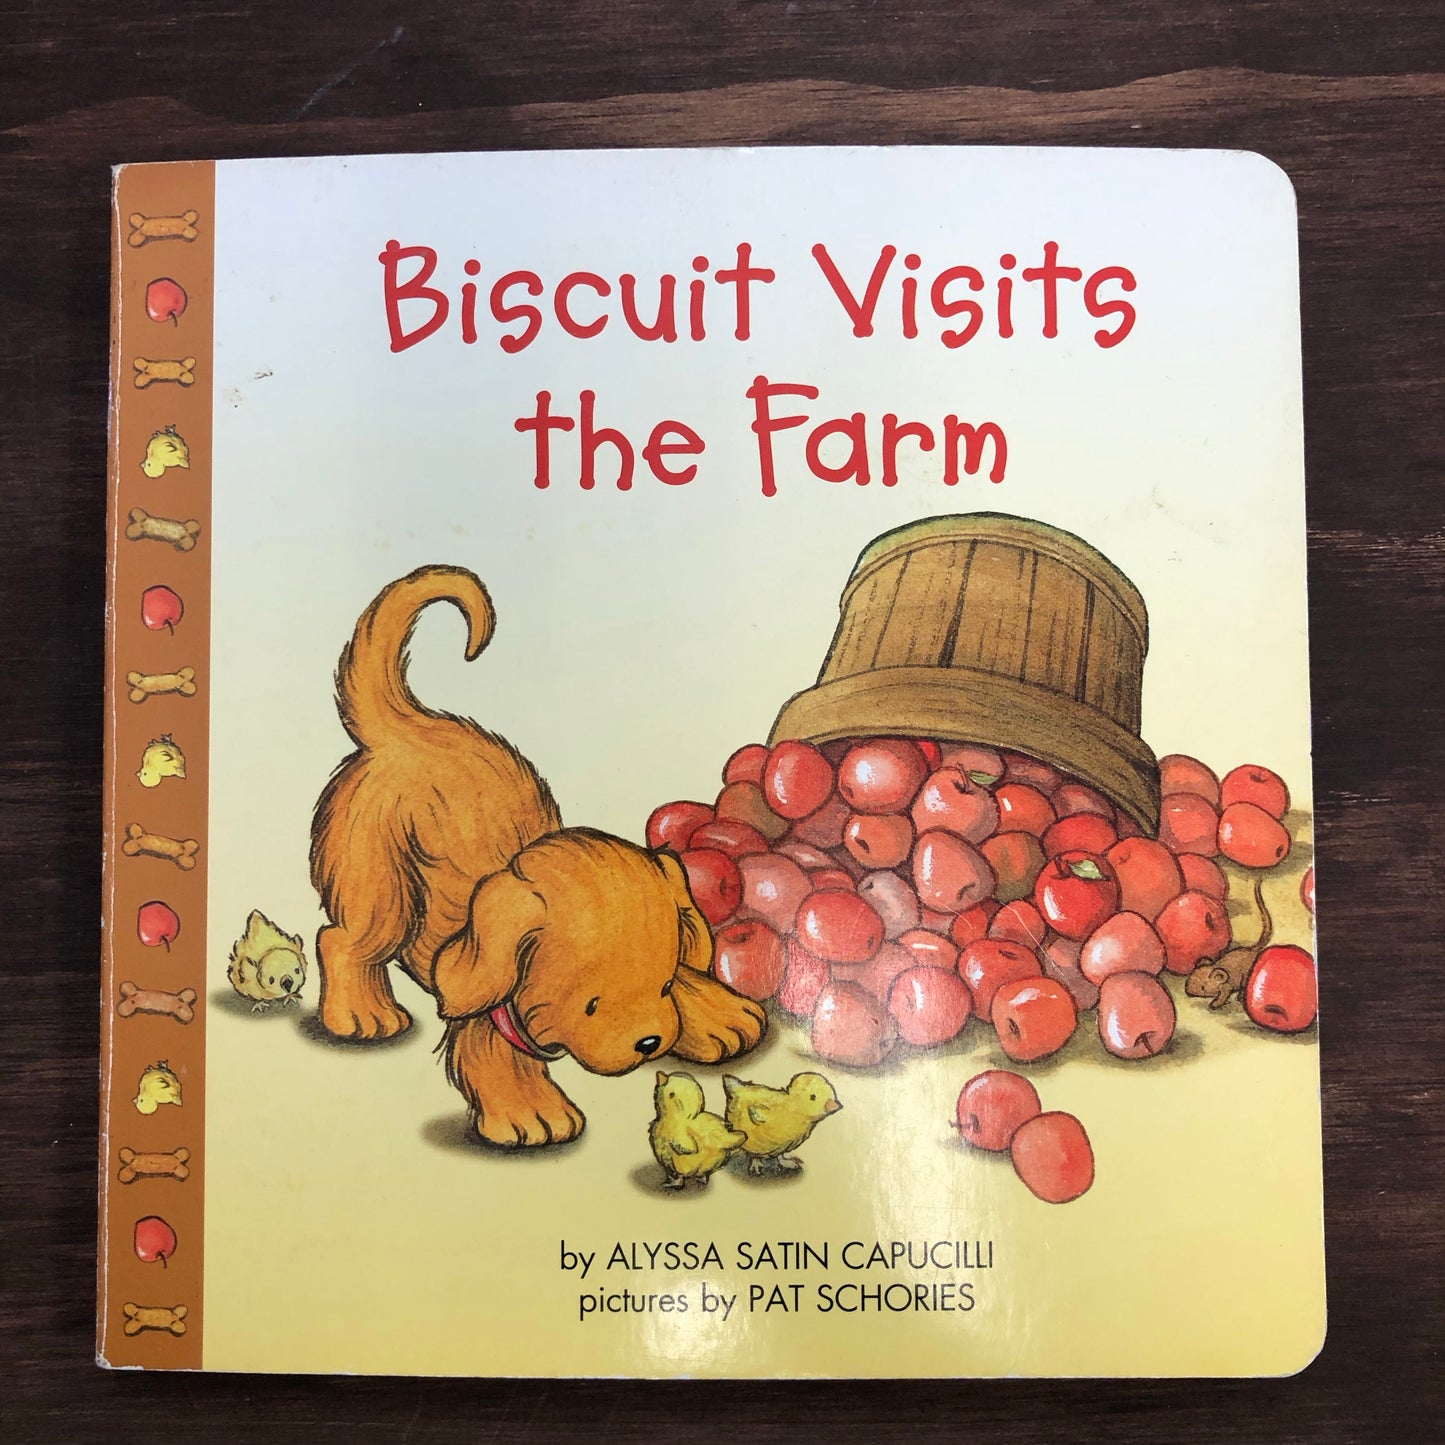 Biscut Visits the Farm